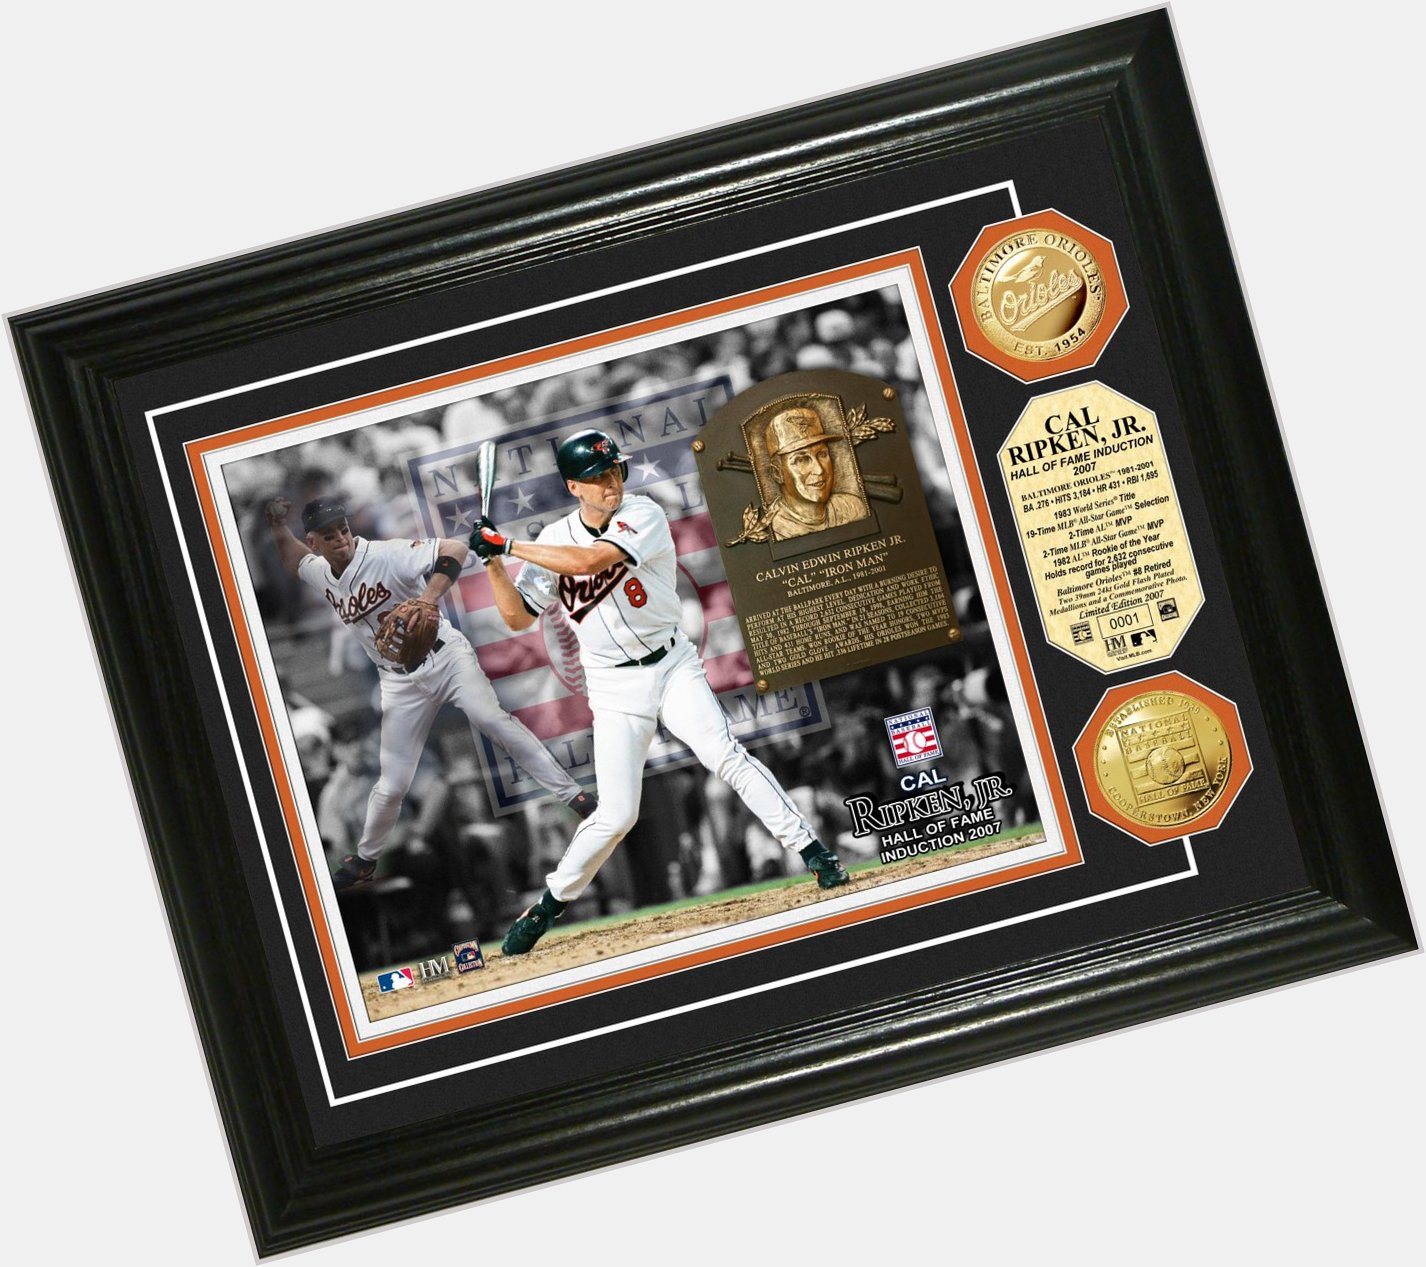 Happy Birthday to Hall of Famer Cal Ripken Jr., who turns 58 today.

Product information at  